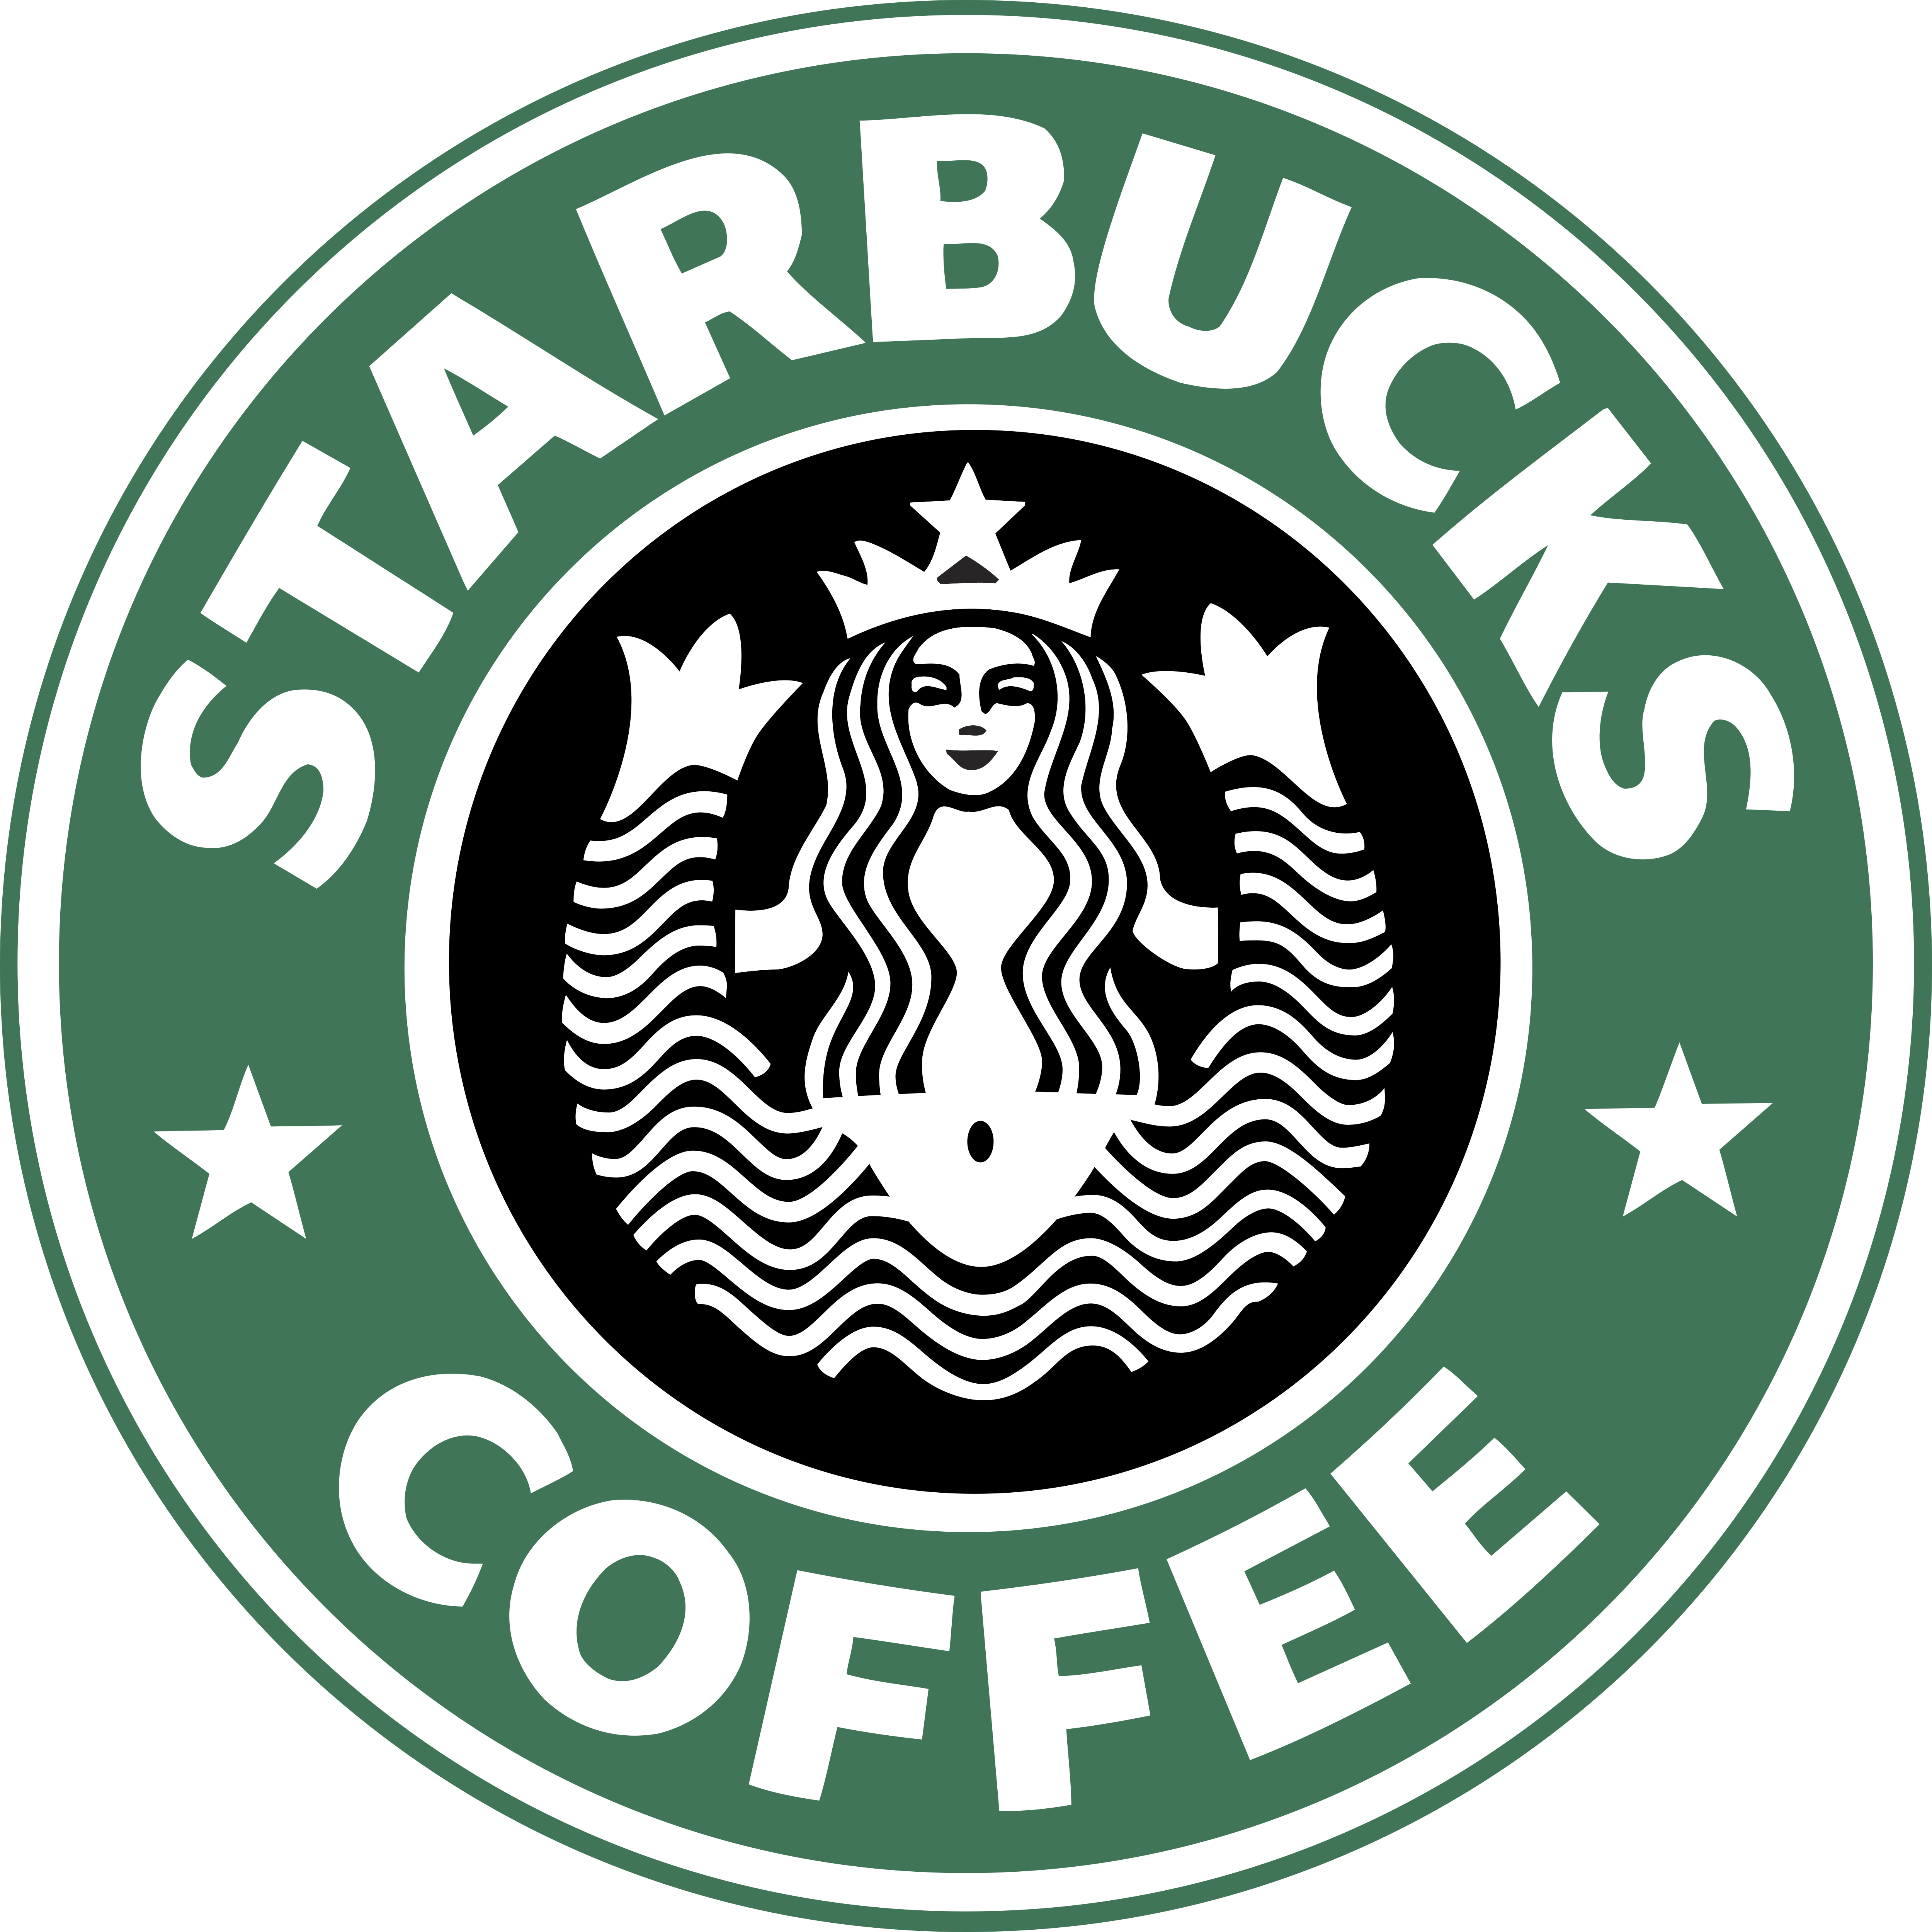 top-99-starbucks-logo-download-most-viewed-and-downloaded-wikipedia